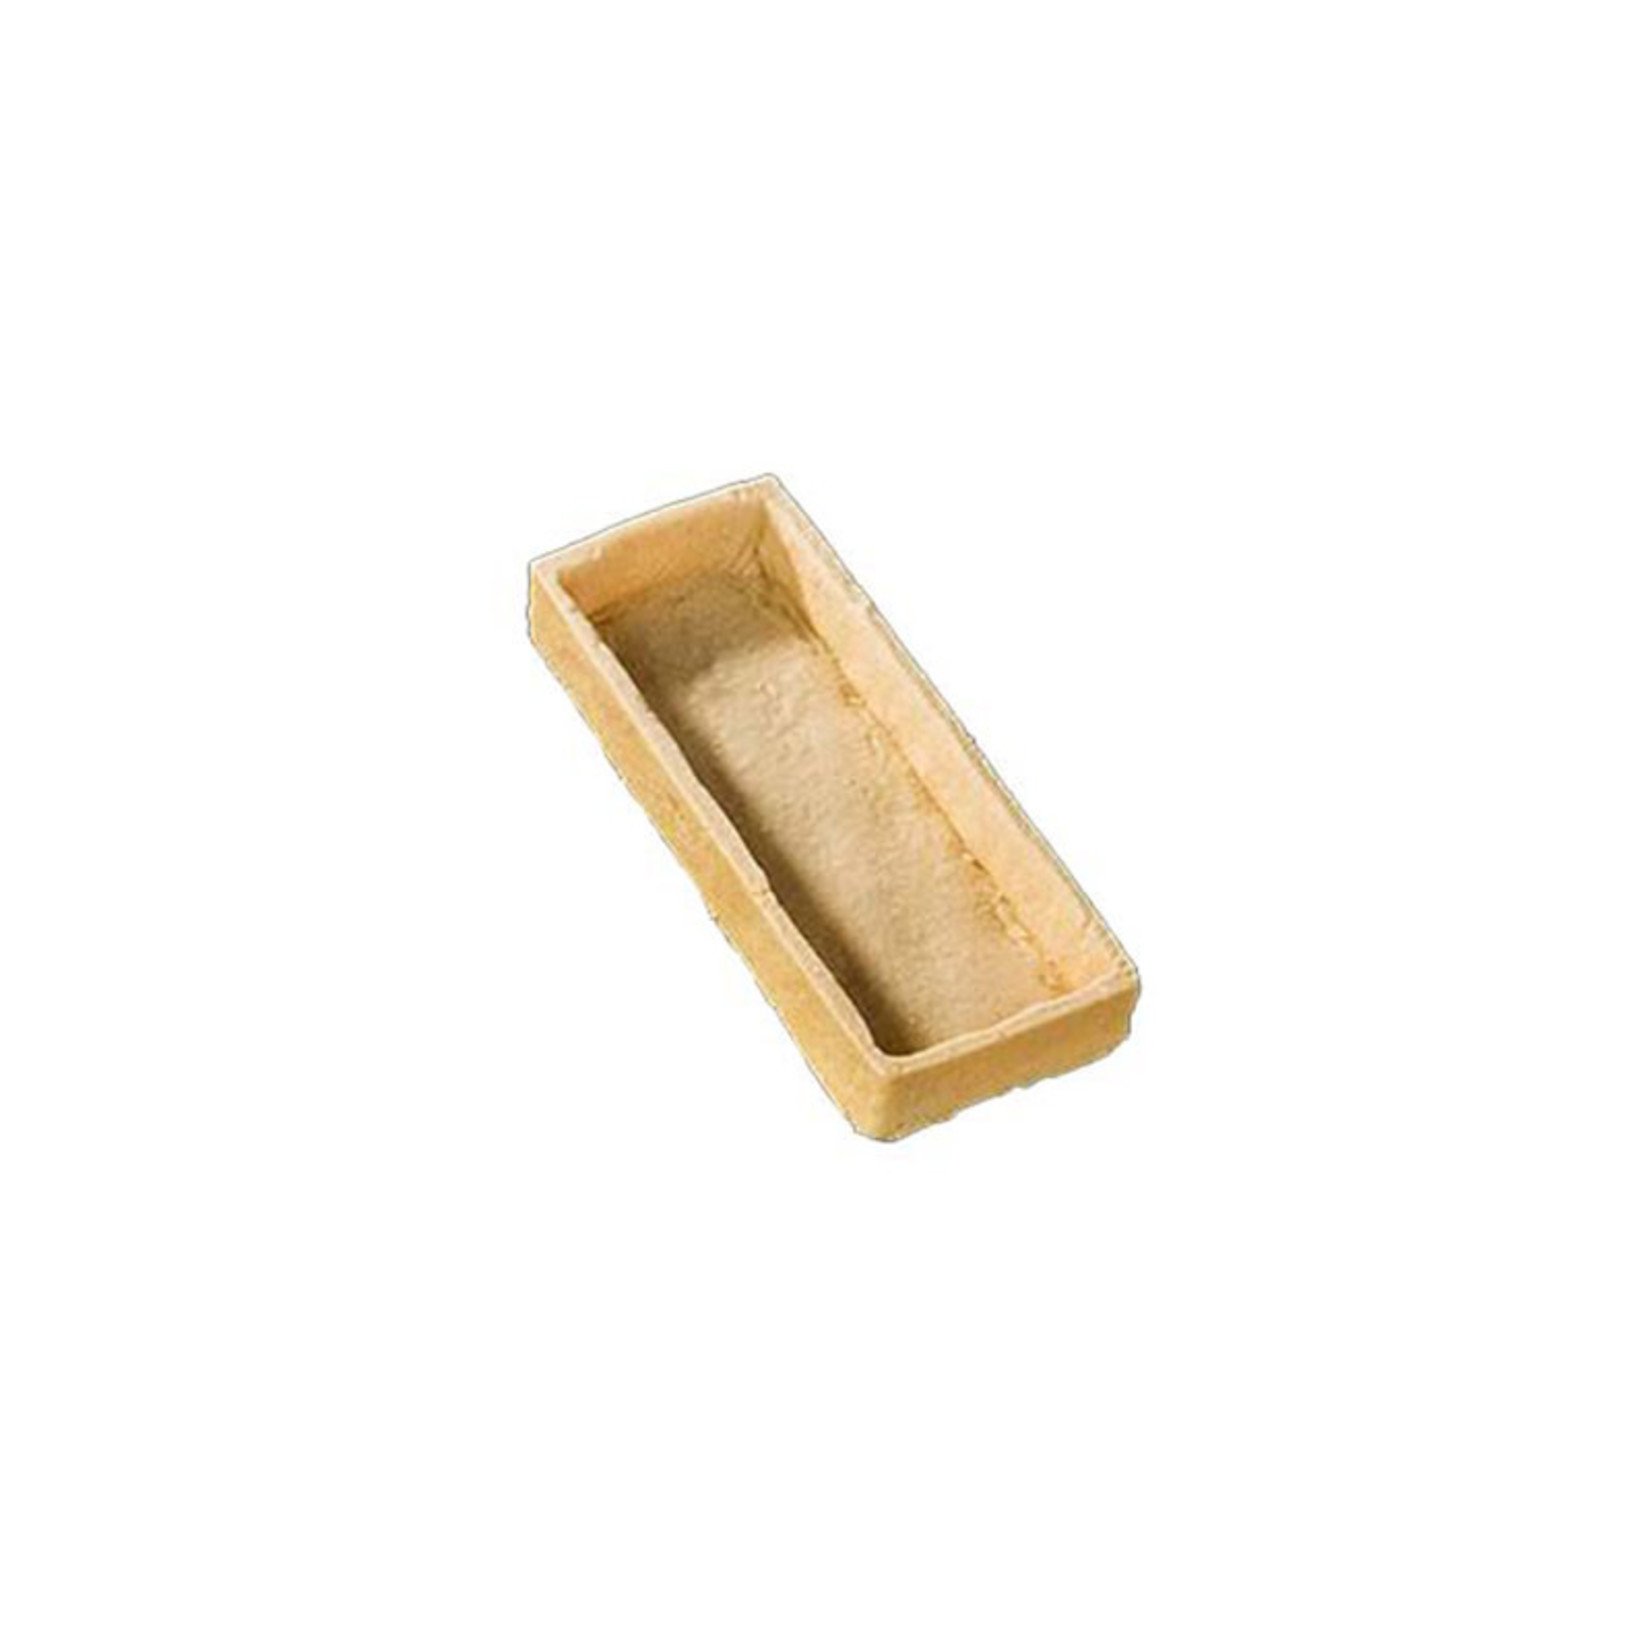 Le Chic Patissier Le Chic Patissier - Sweet Rectangle Tart shell - 4x1.5" (75 ct)